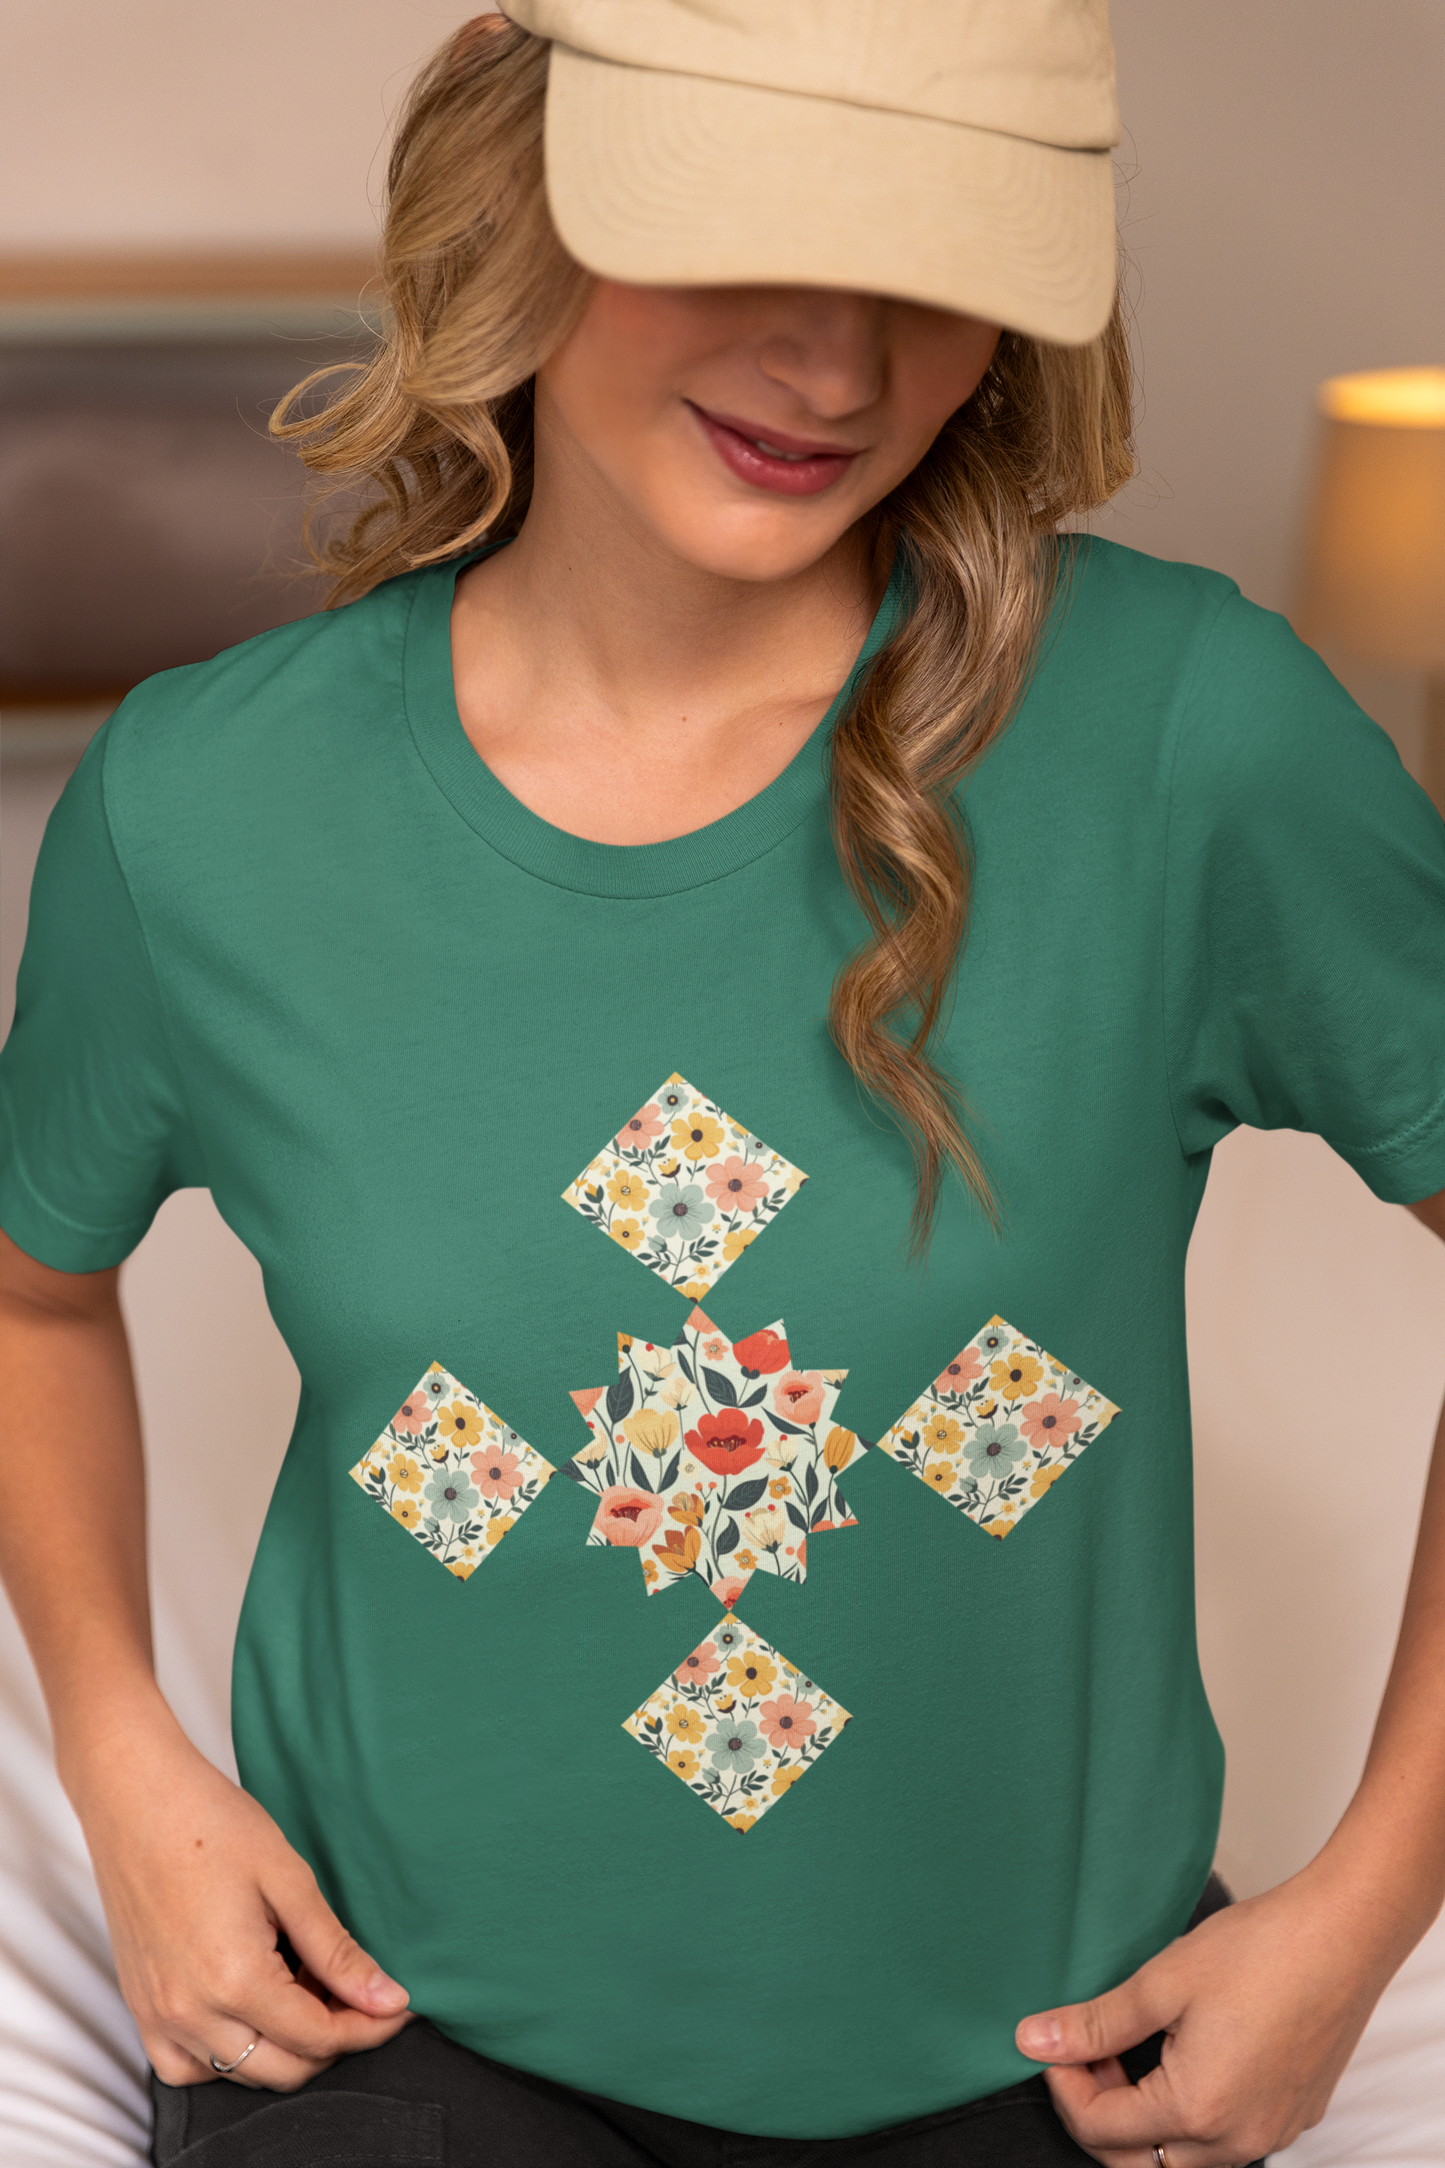 Crafting t-shirt, quilting gift for quilter mom, cottagecore style clothing.